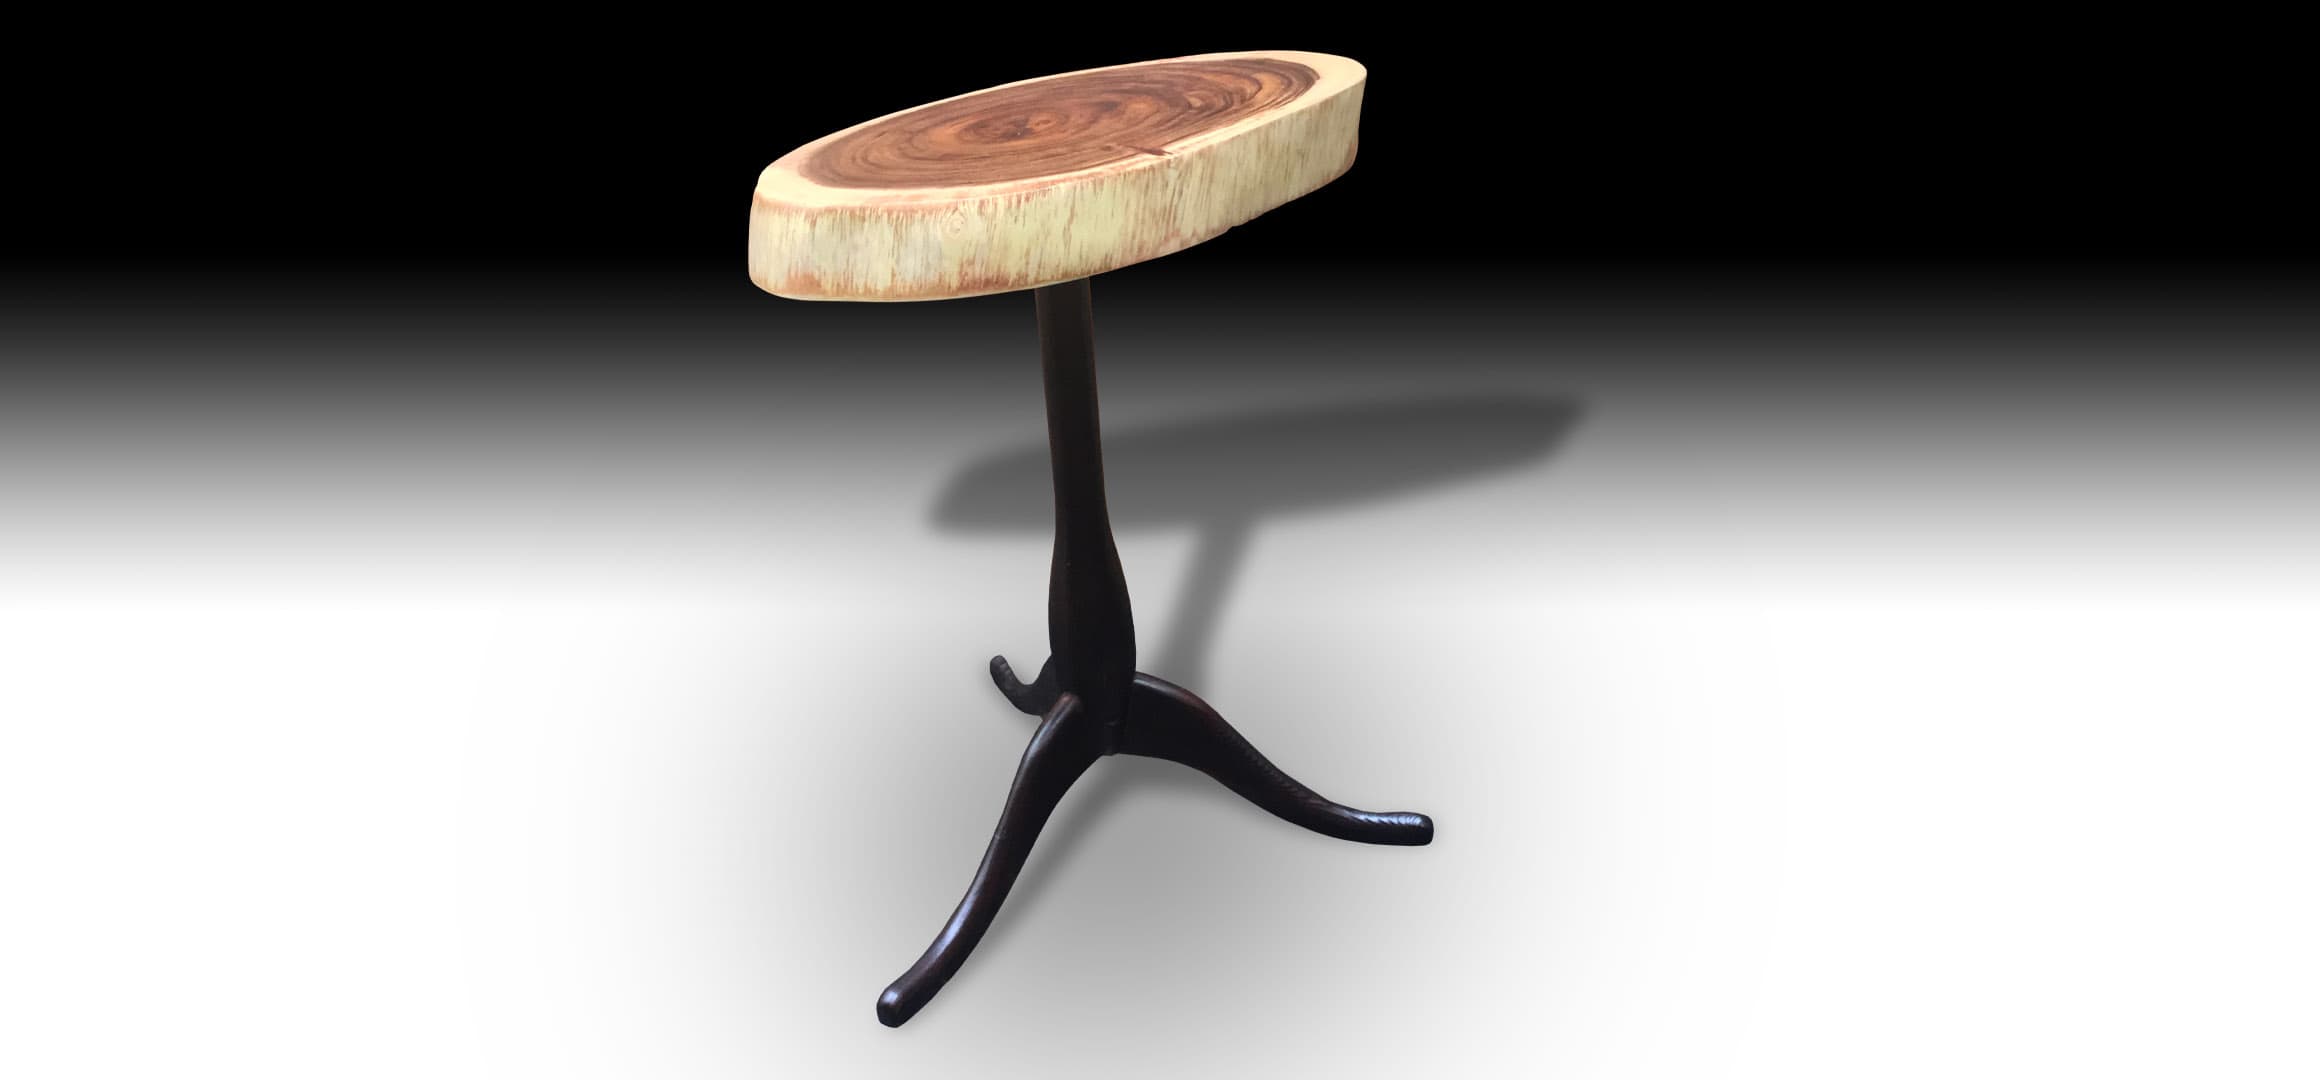 Tripod live edge suar wood side table with wooden base